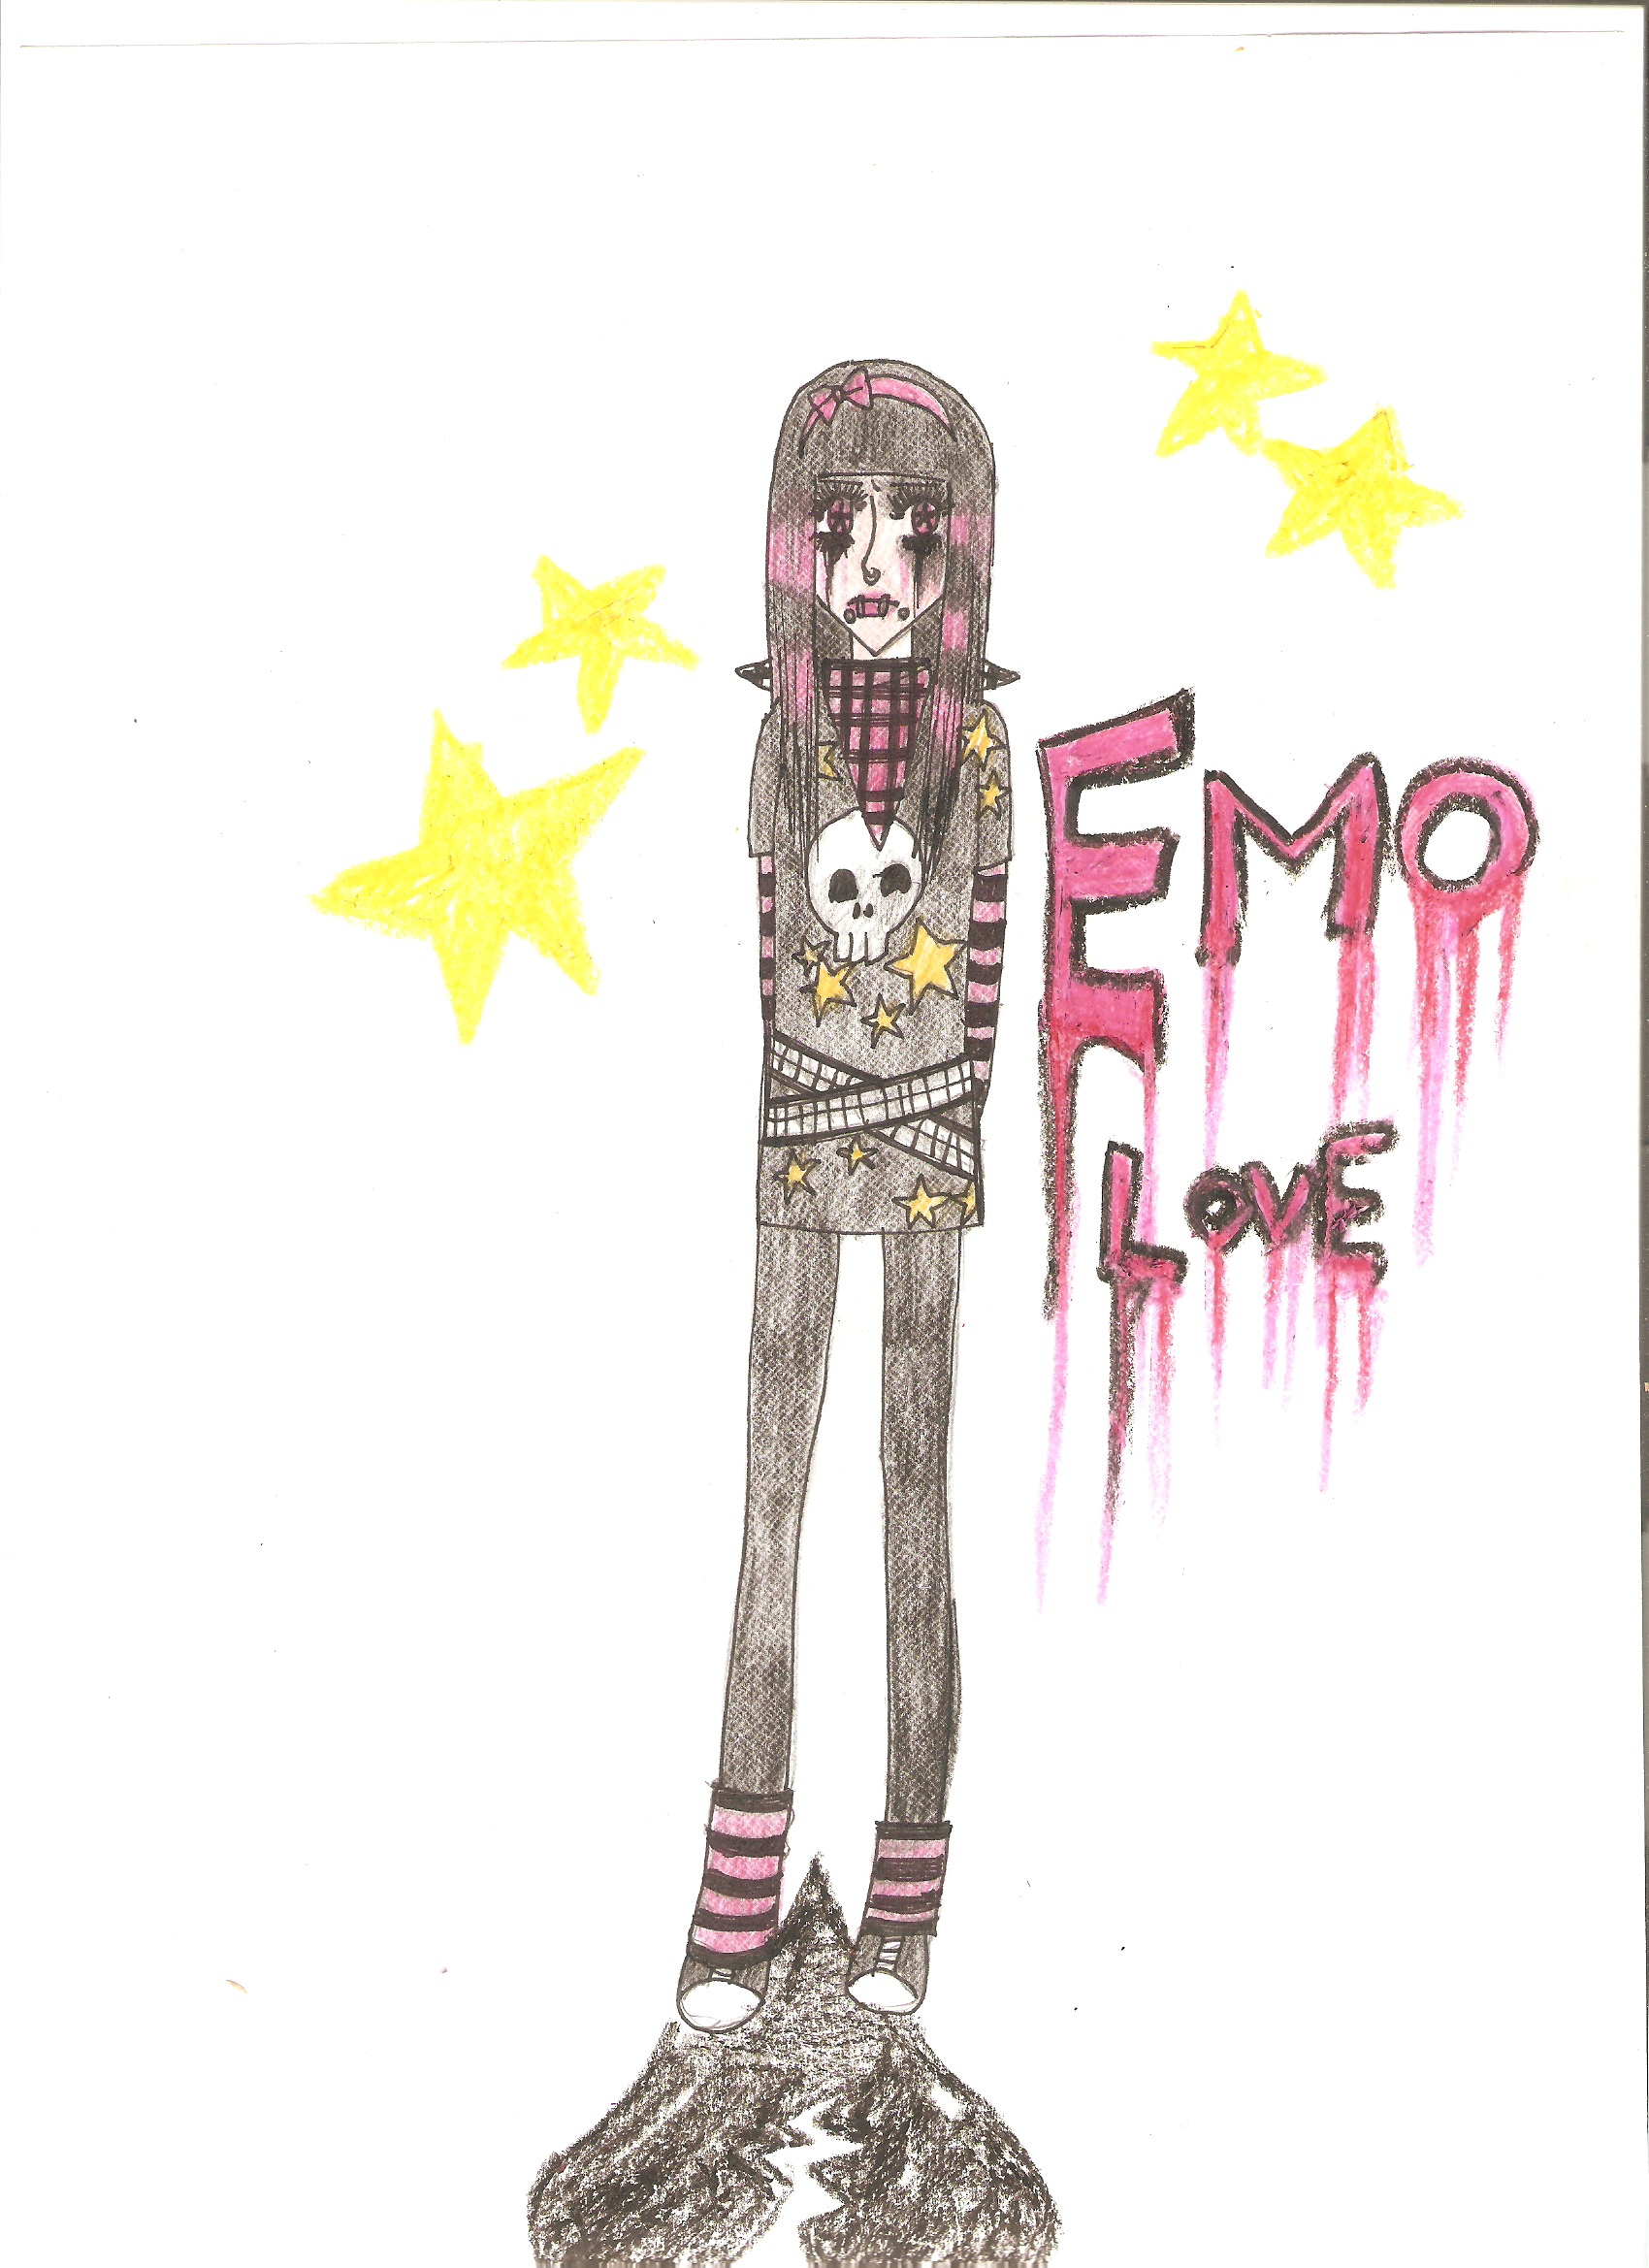 Emo Love Quotes Wallpaper Aesthetic Tumblr Themes 5 Quotes